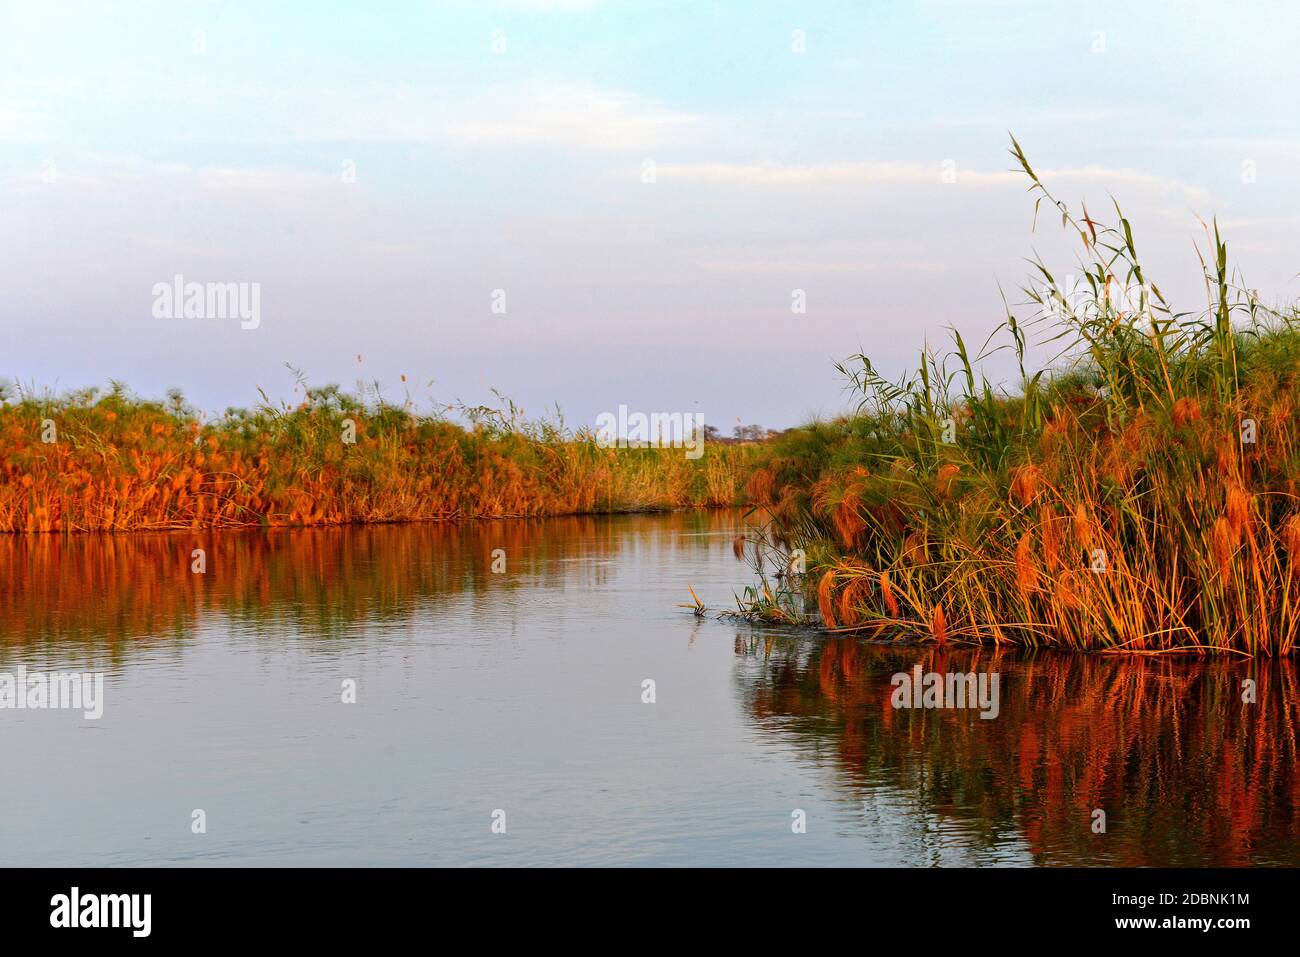 River trip on the Kwando River in the Caprivi region, Namibia Stock Photo